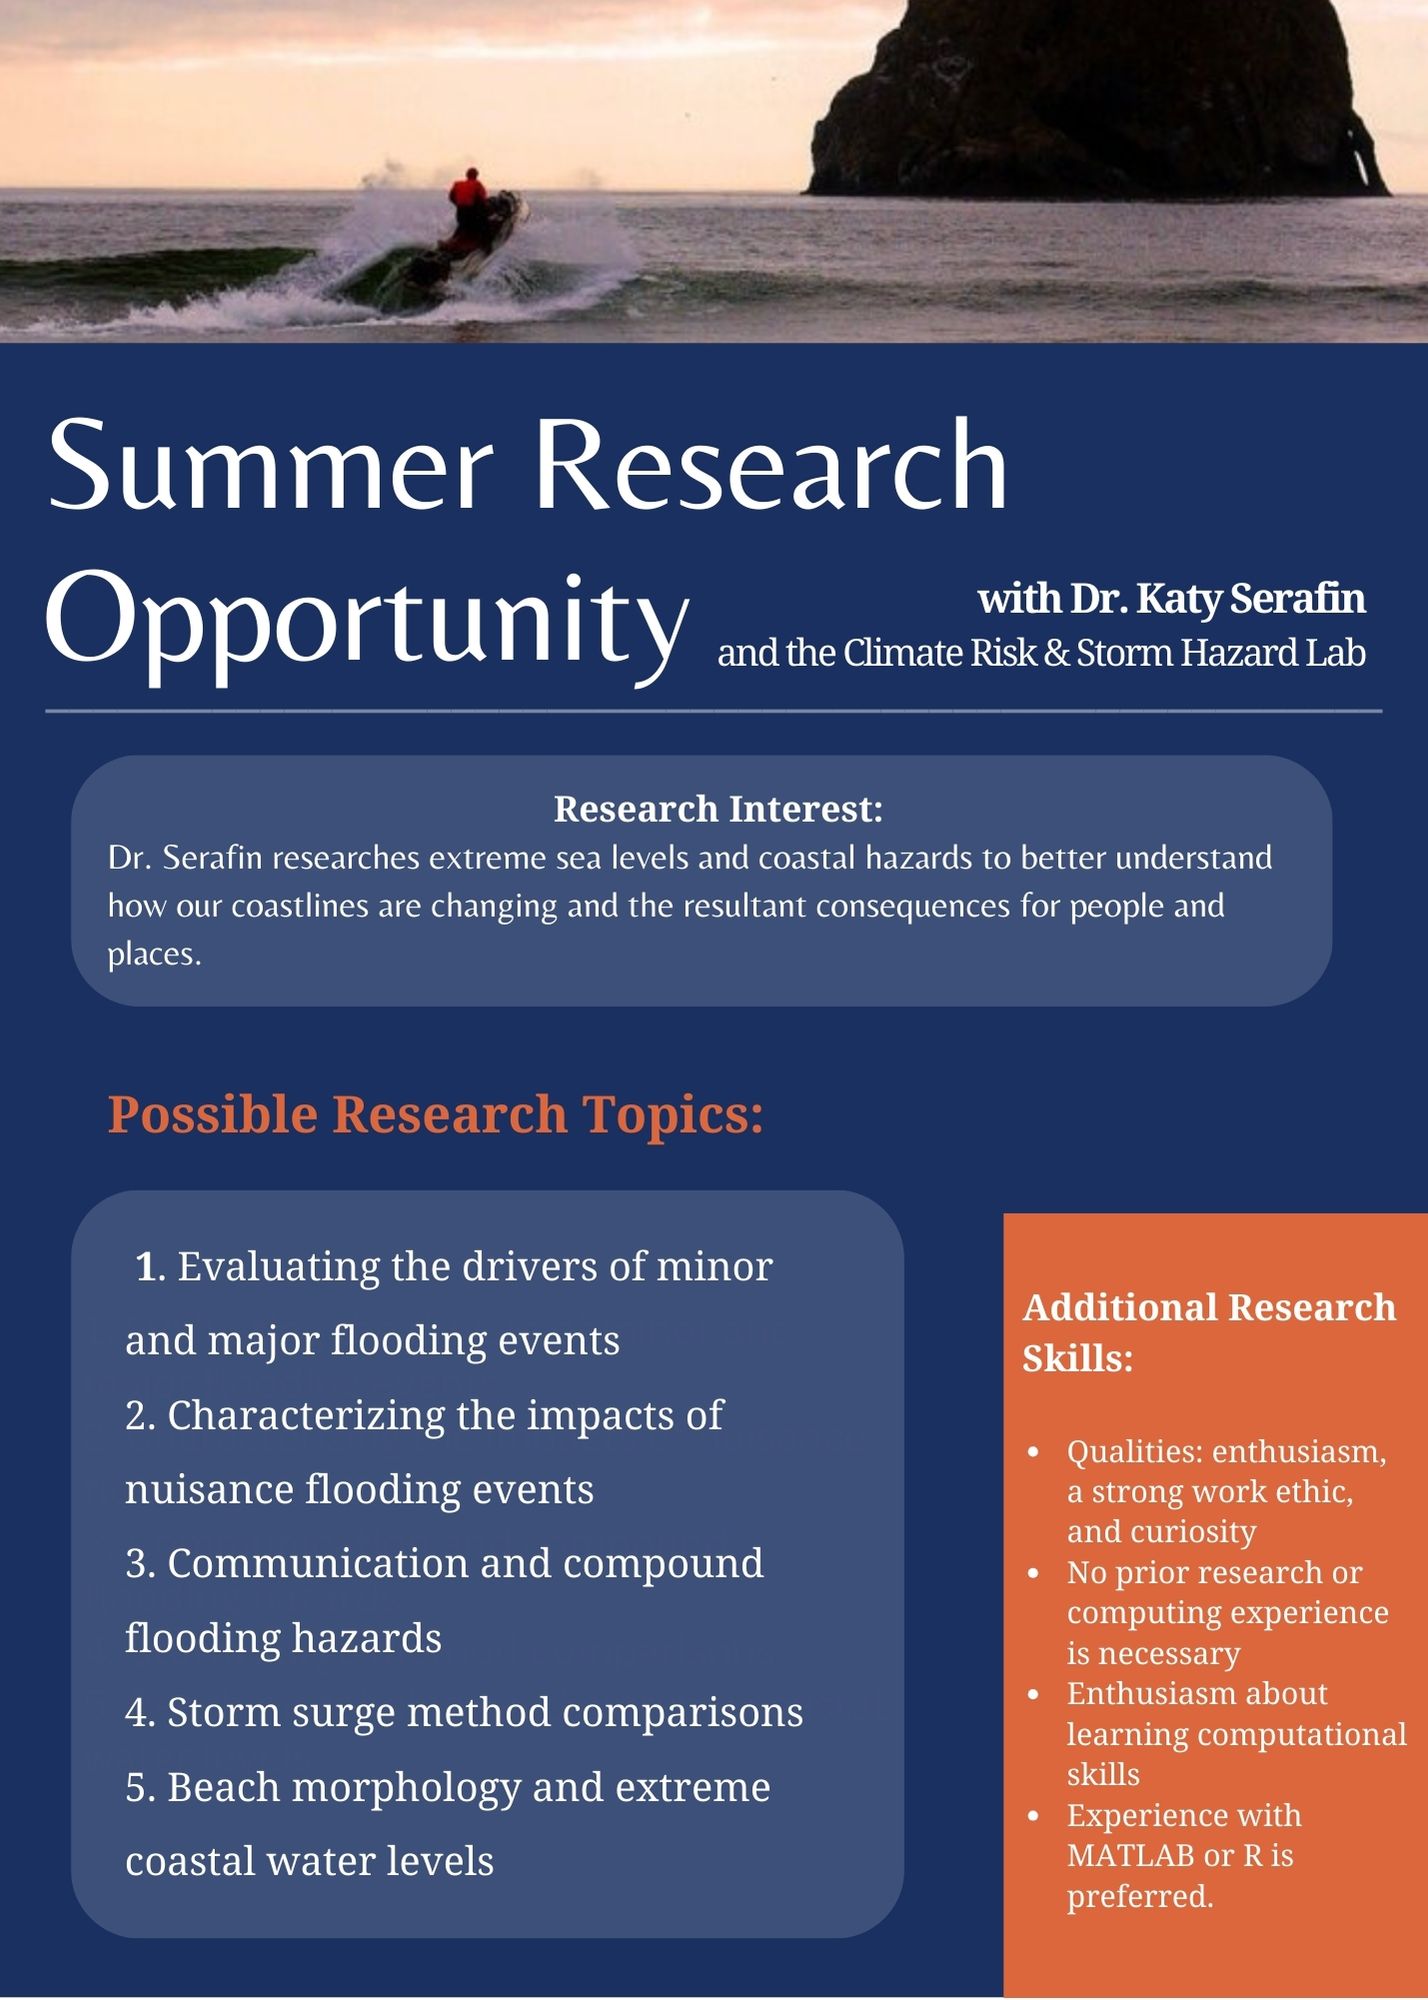 Summer research opportunity with Dr. Katy Serafin